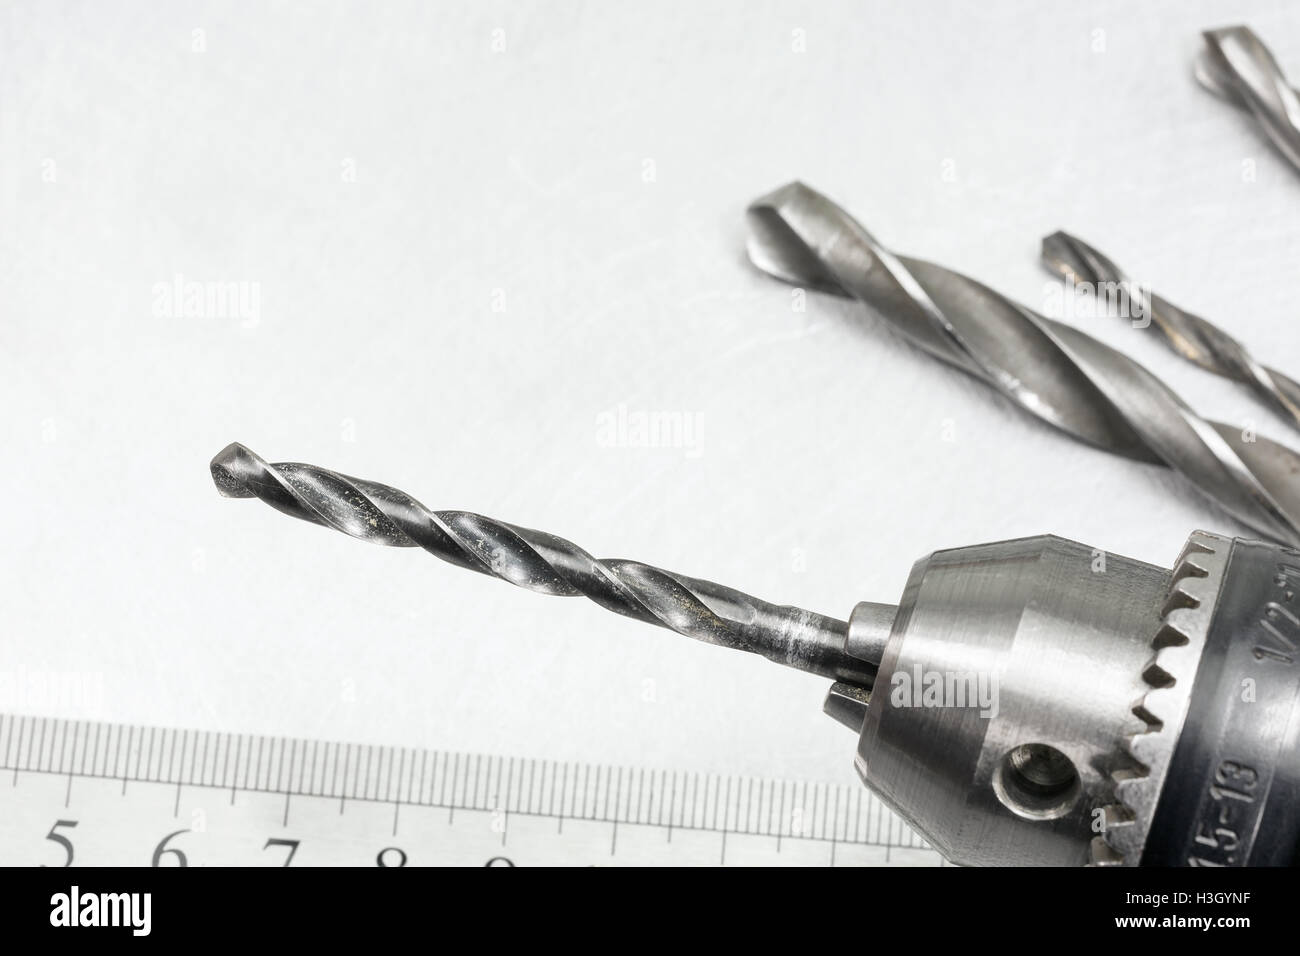 Electric drill head with drill bits on scratched metal background Stock Photo